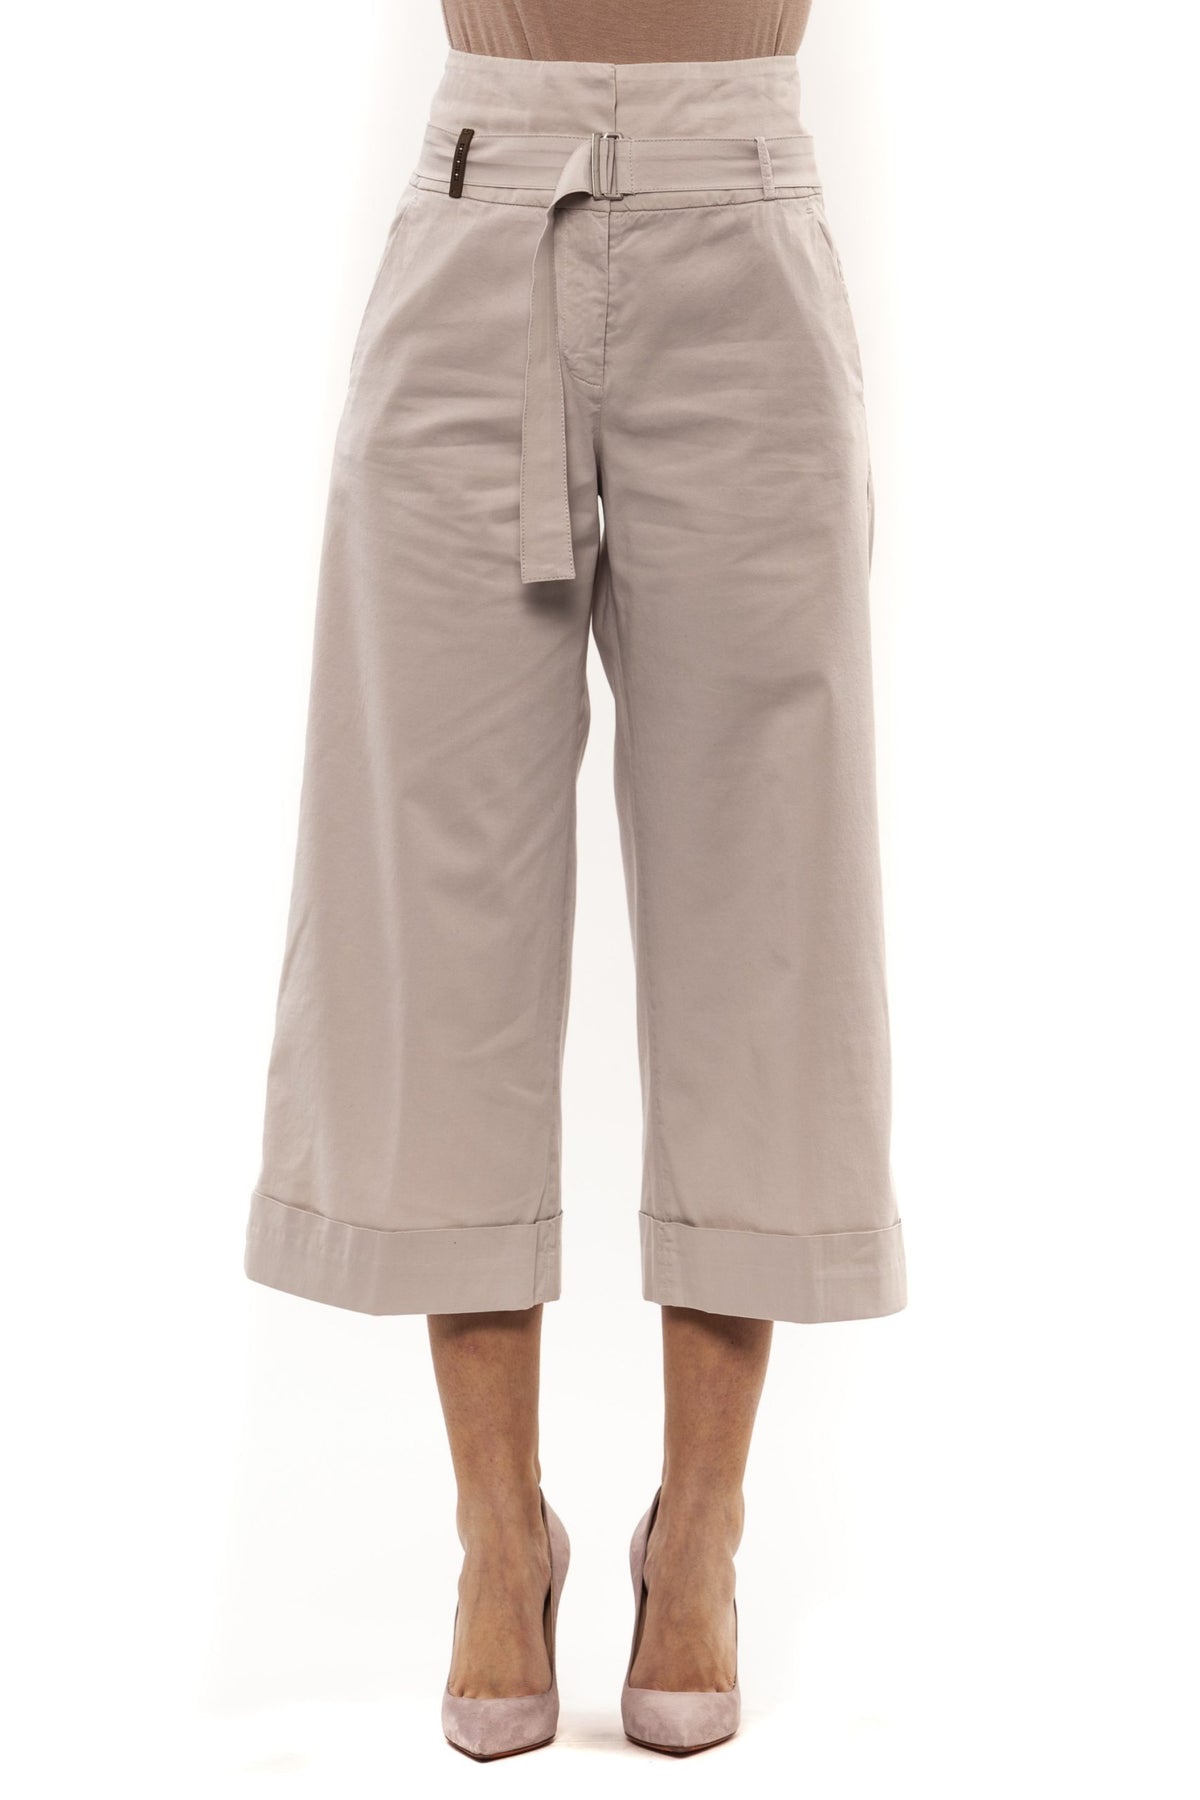 PESERICO Beige High Waist Wide Fit Ankle Pant